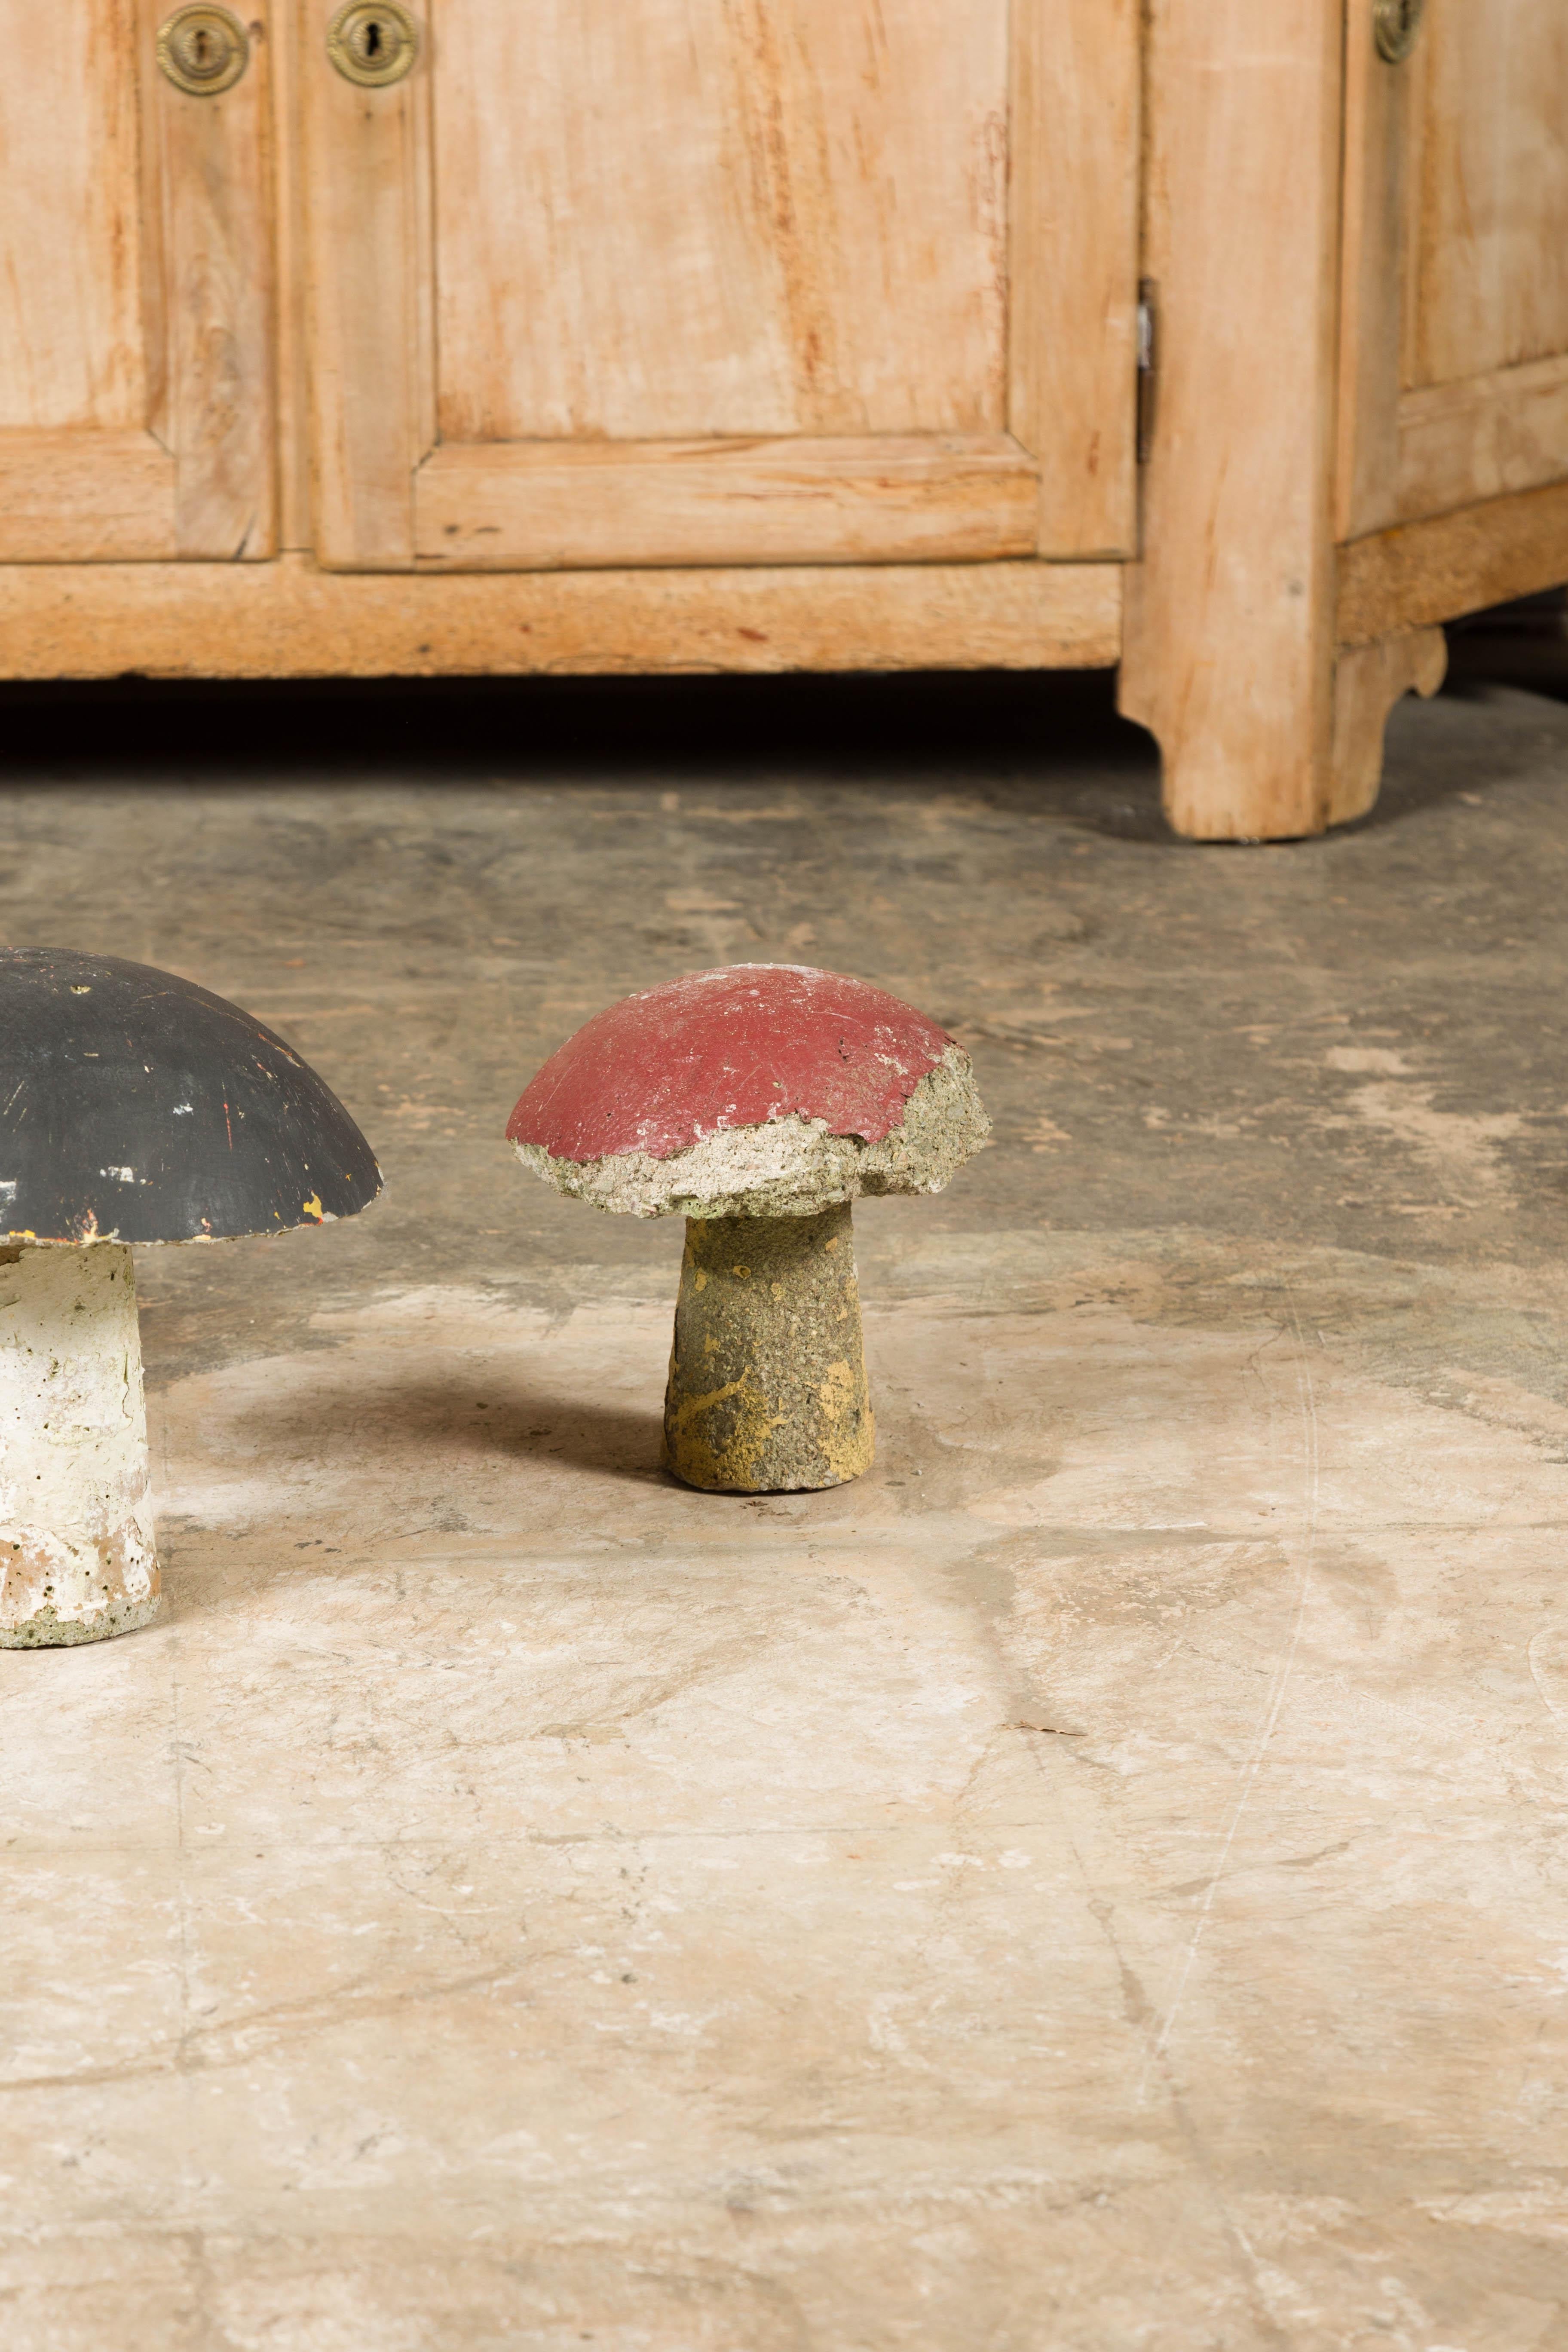 Set of Three American Midcentury Painted Concrete Mushroom Garden Ornaments For Sale 3